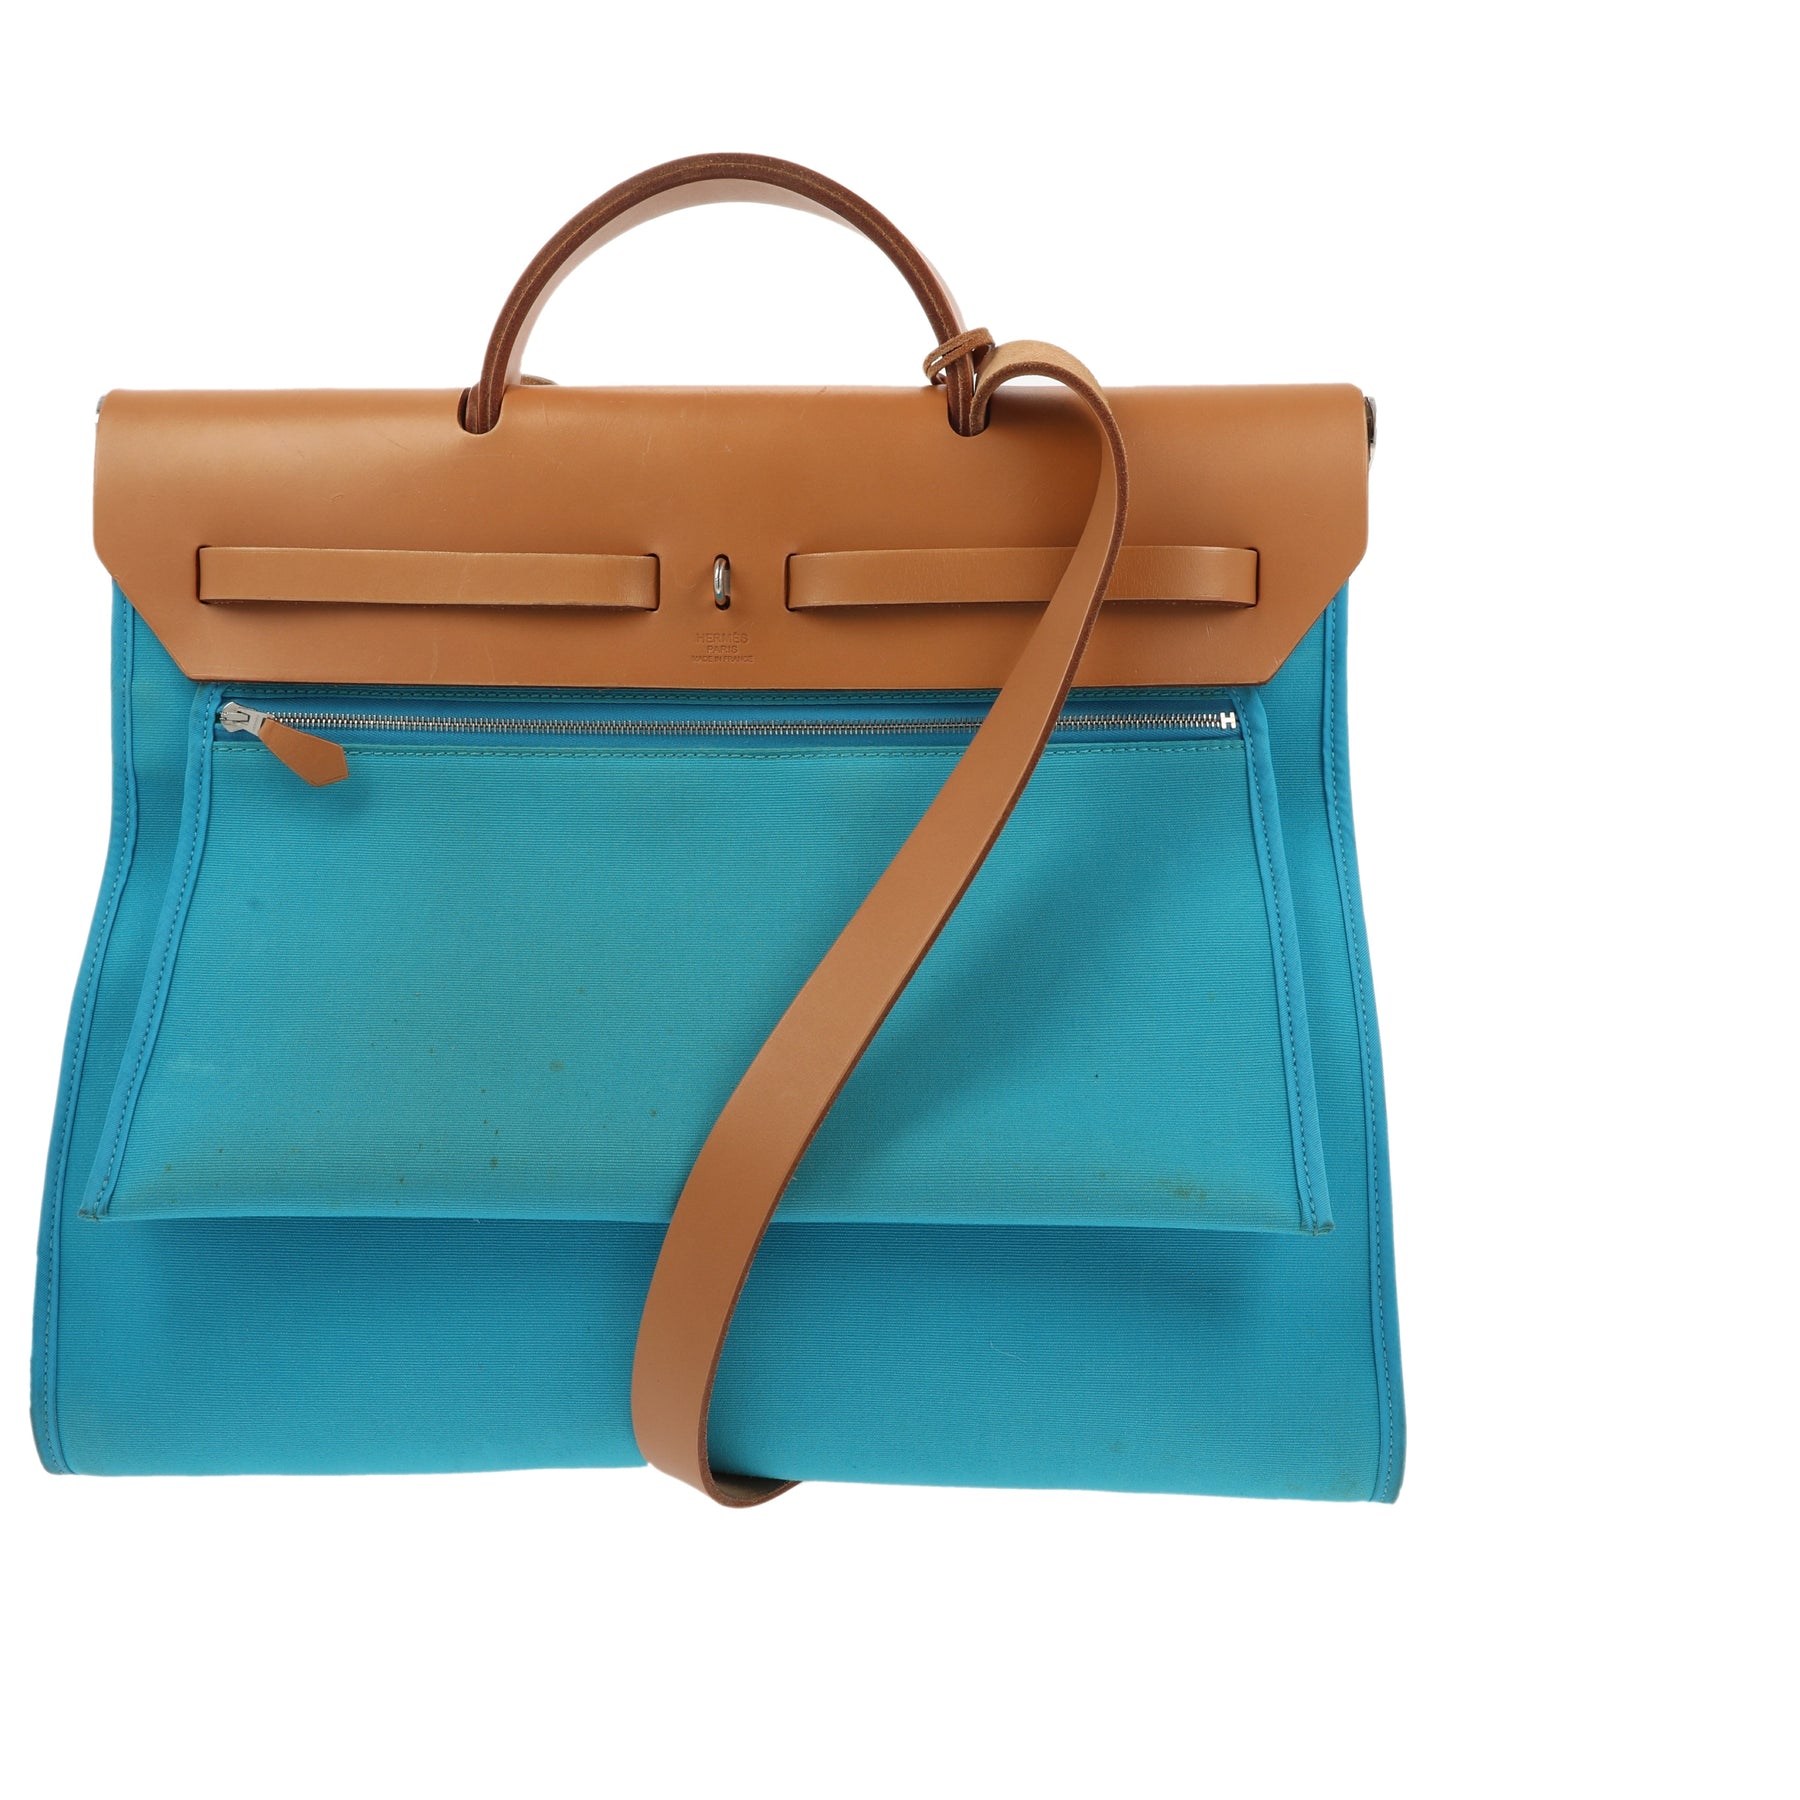 WHY I LOVE THE HERMES HERBAG  Reviewing my vintage Herbag PM +